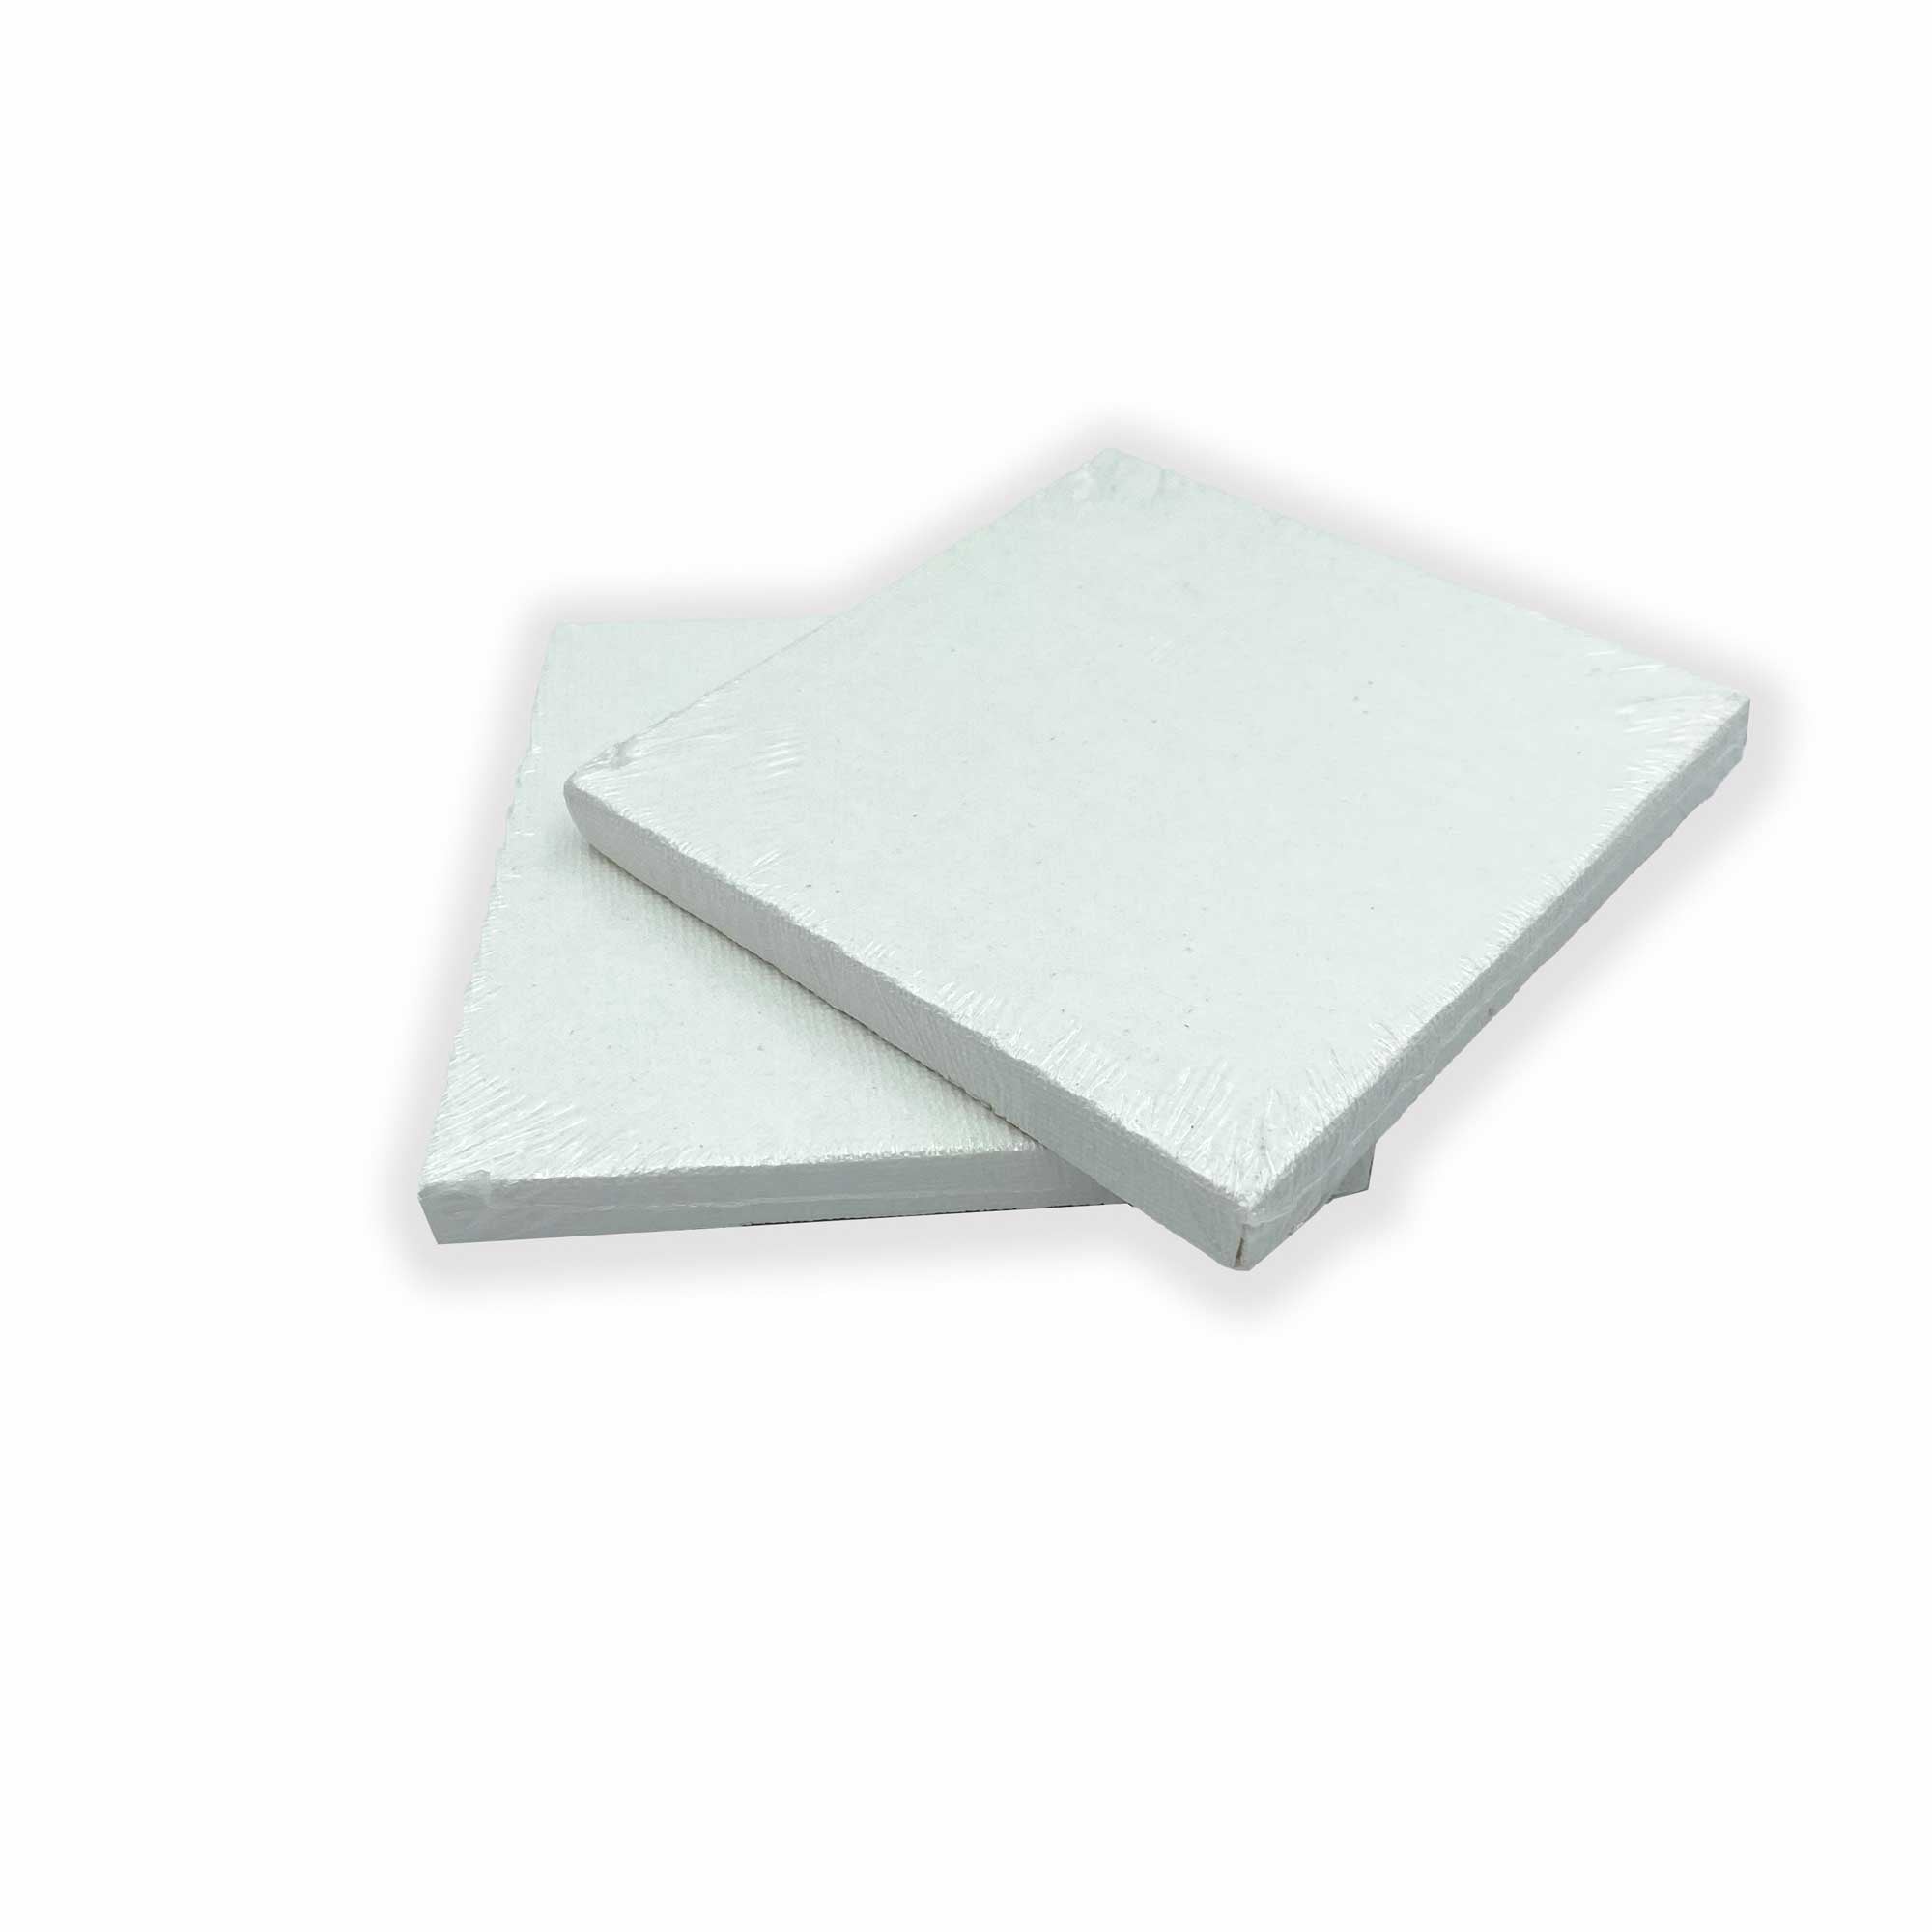 Daler-Rowney Simply Mini Stretched Canvases 4 x 4 (10 x 10cm